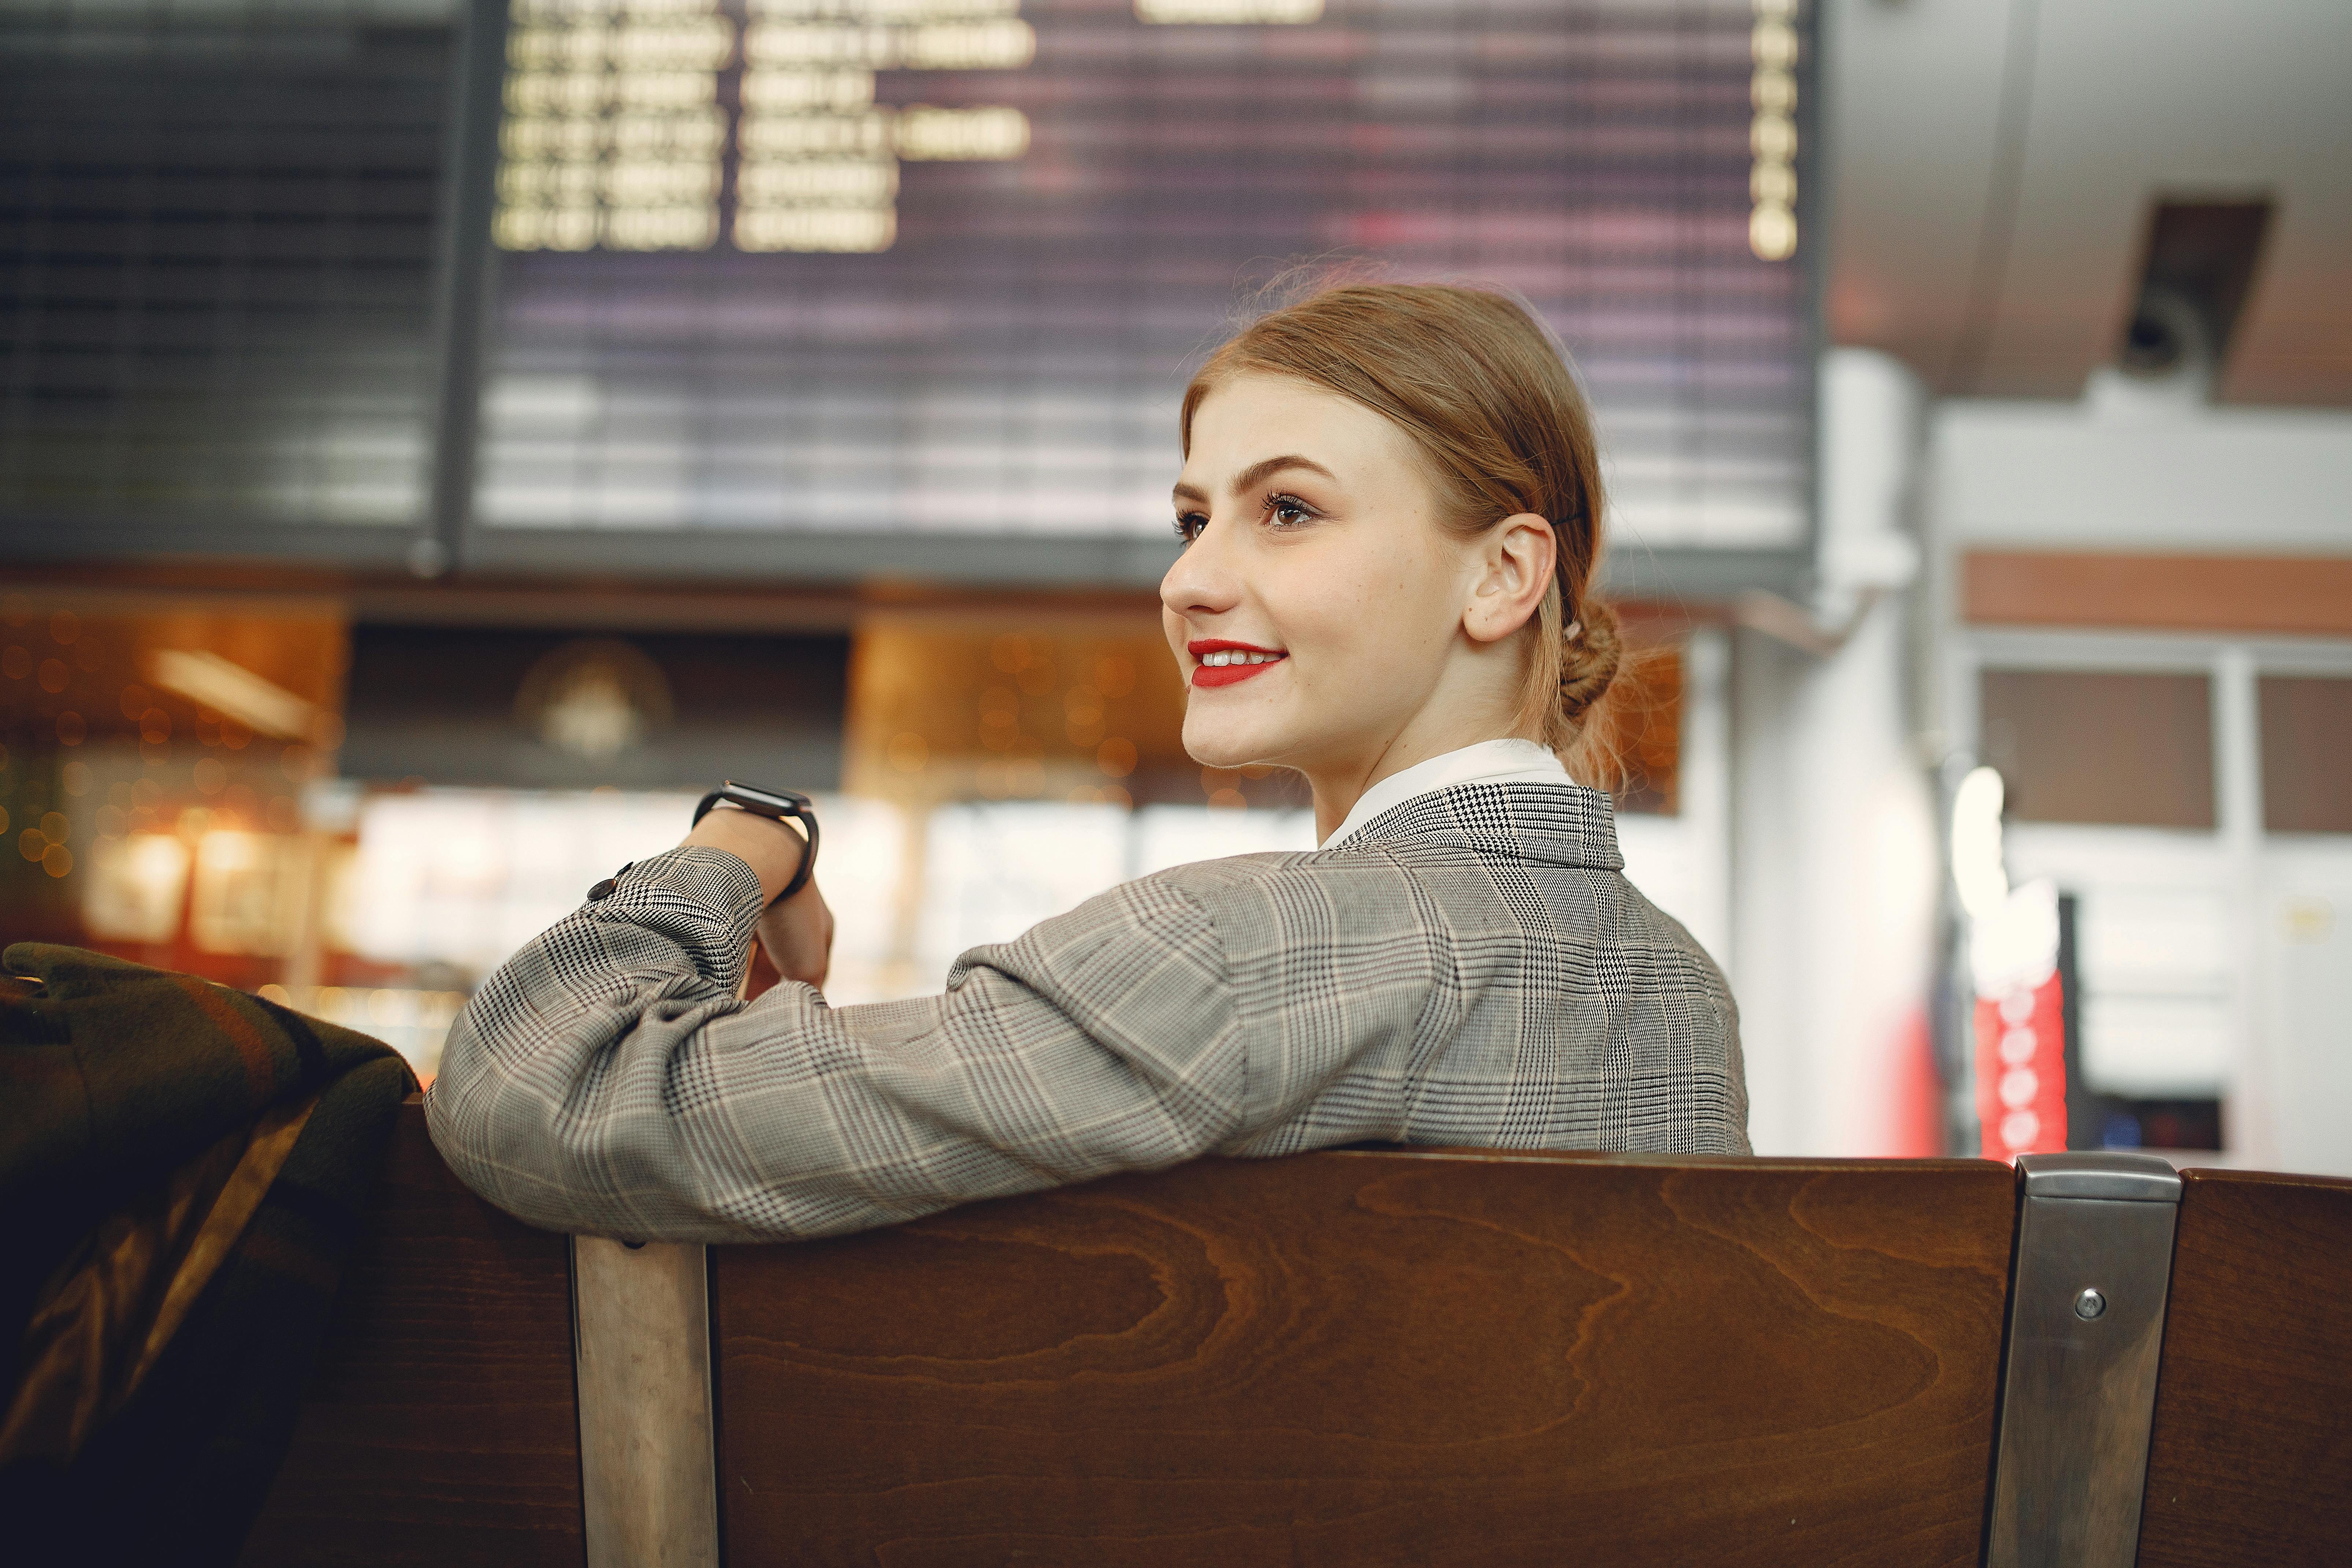 A happy woman sitting at the airport | Source: Pexels